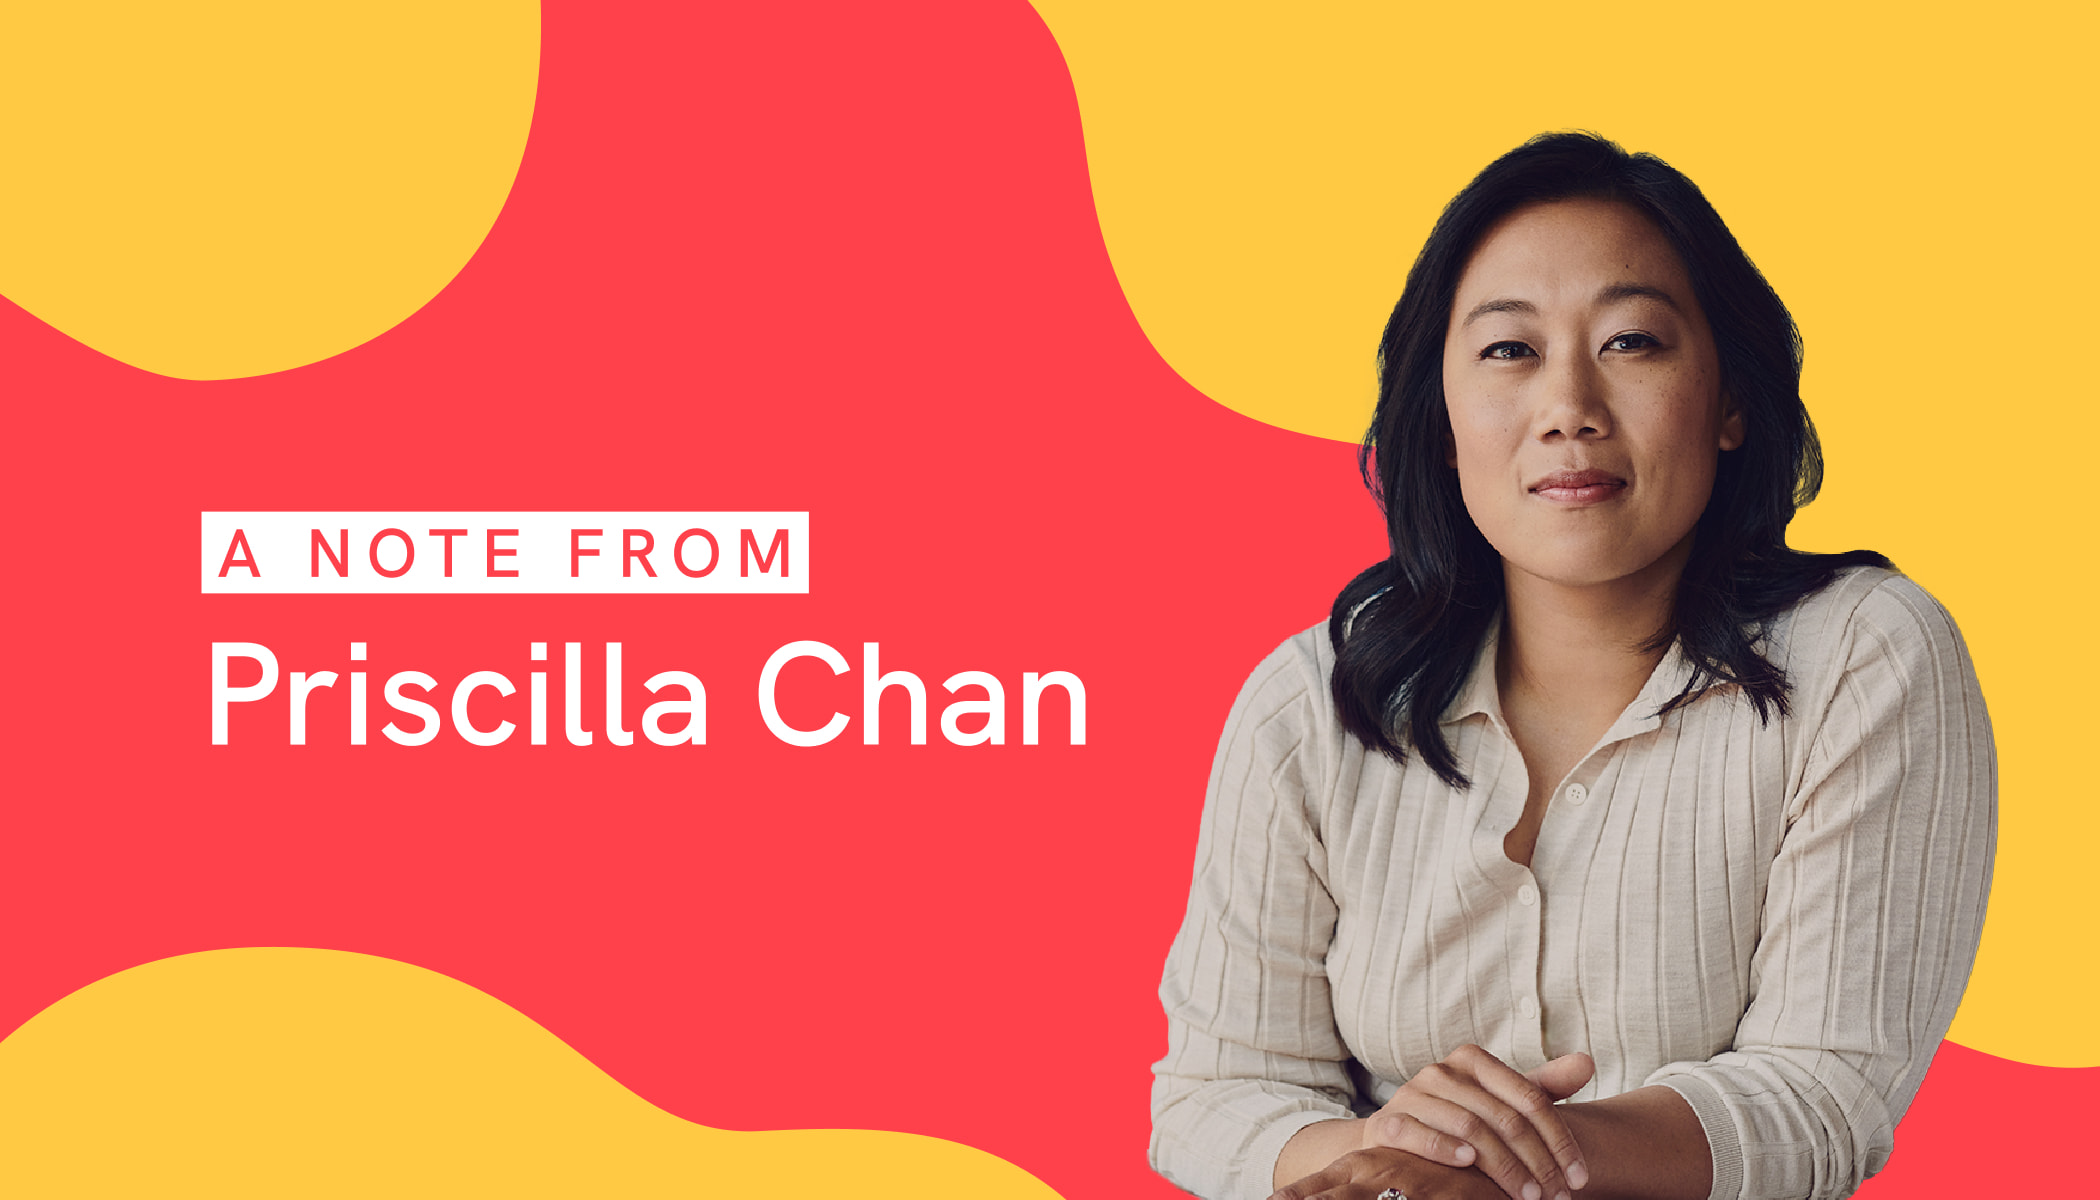 Priscilla Chan, Co-CEO of the Chan Zuckerberg Initiative, looking at the camera with her arms folded and in front of a red and yellow illustrated background.